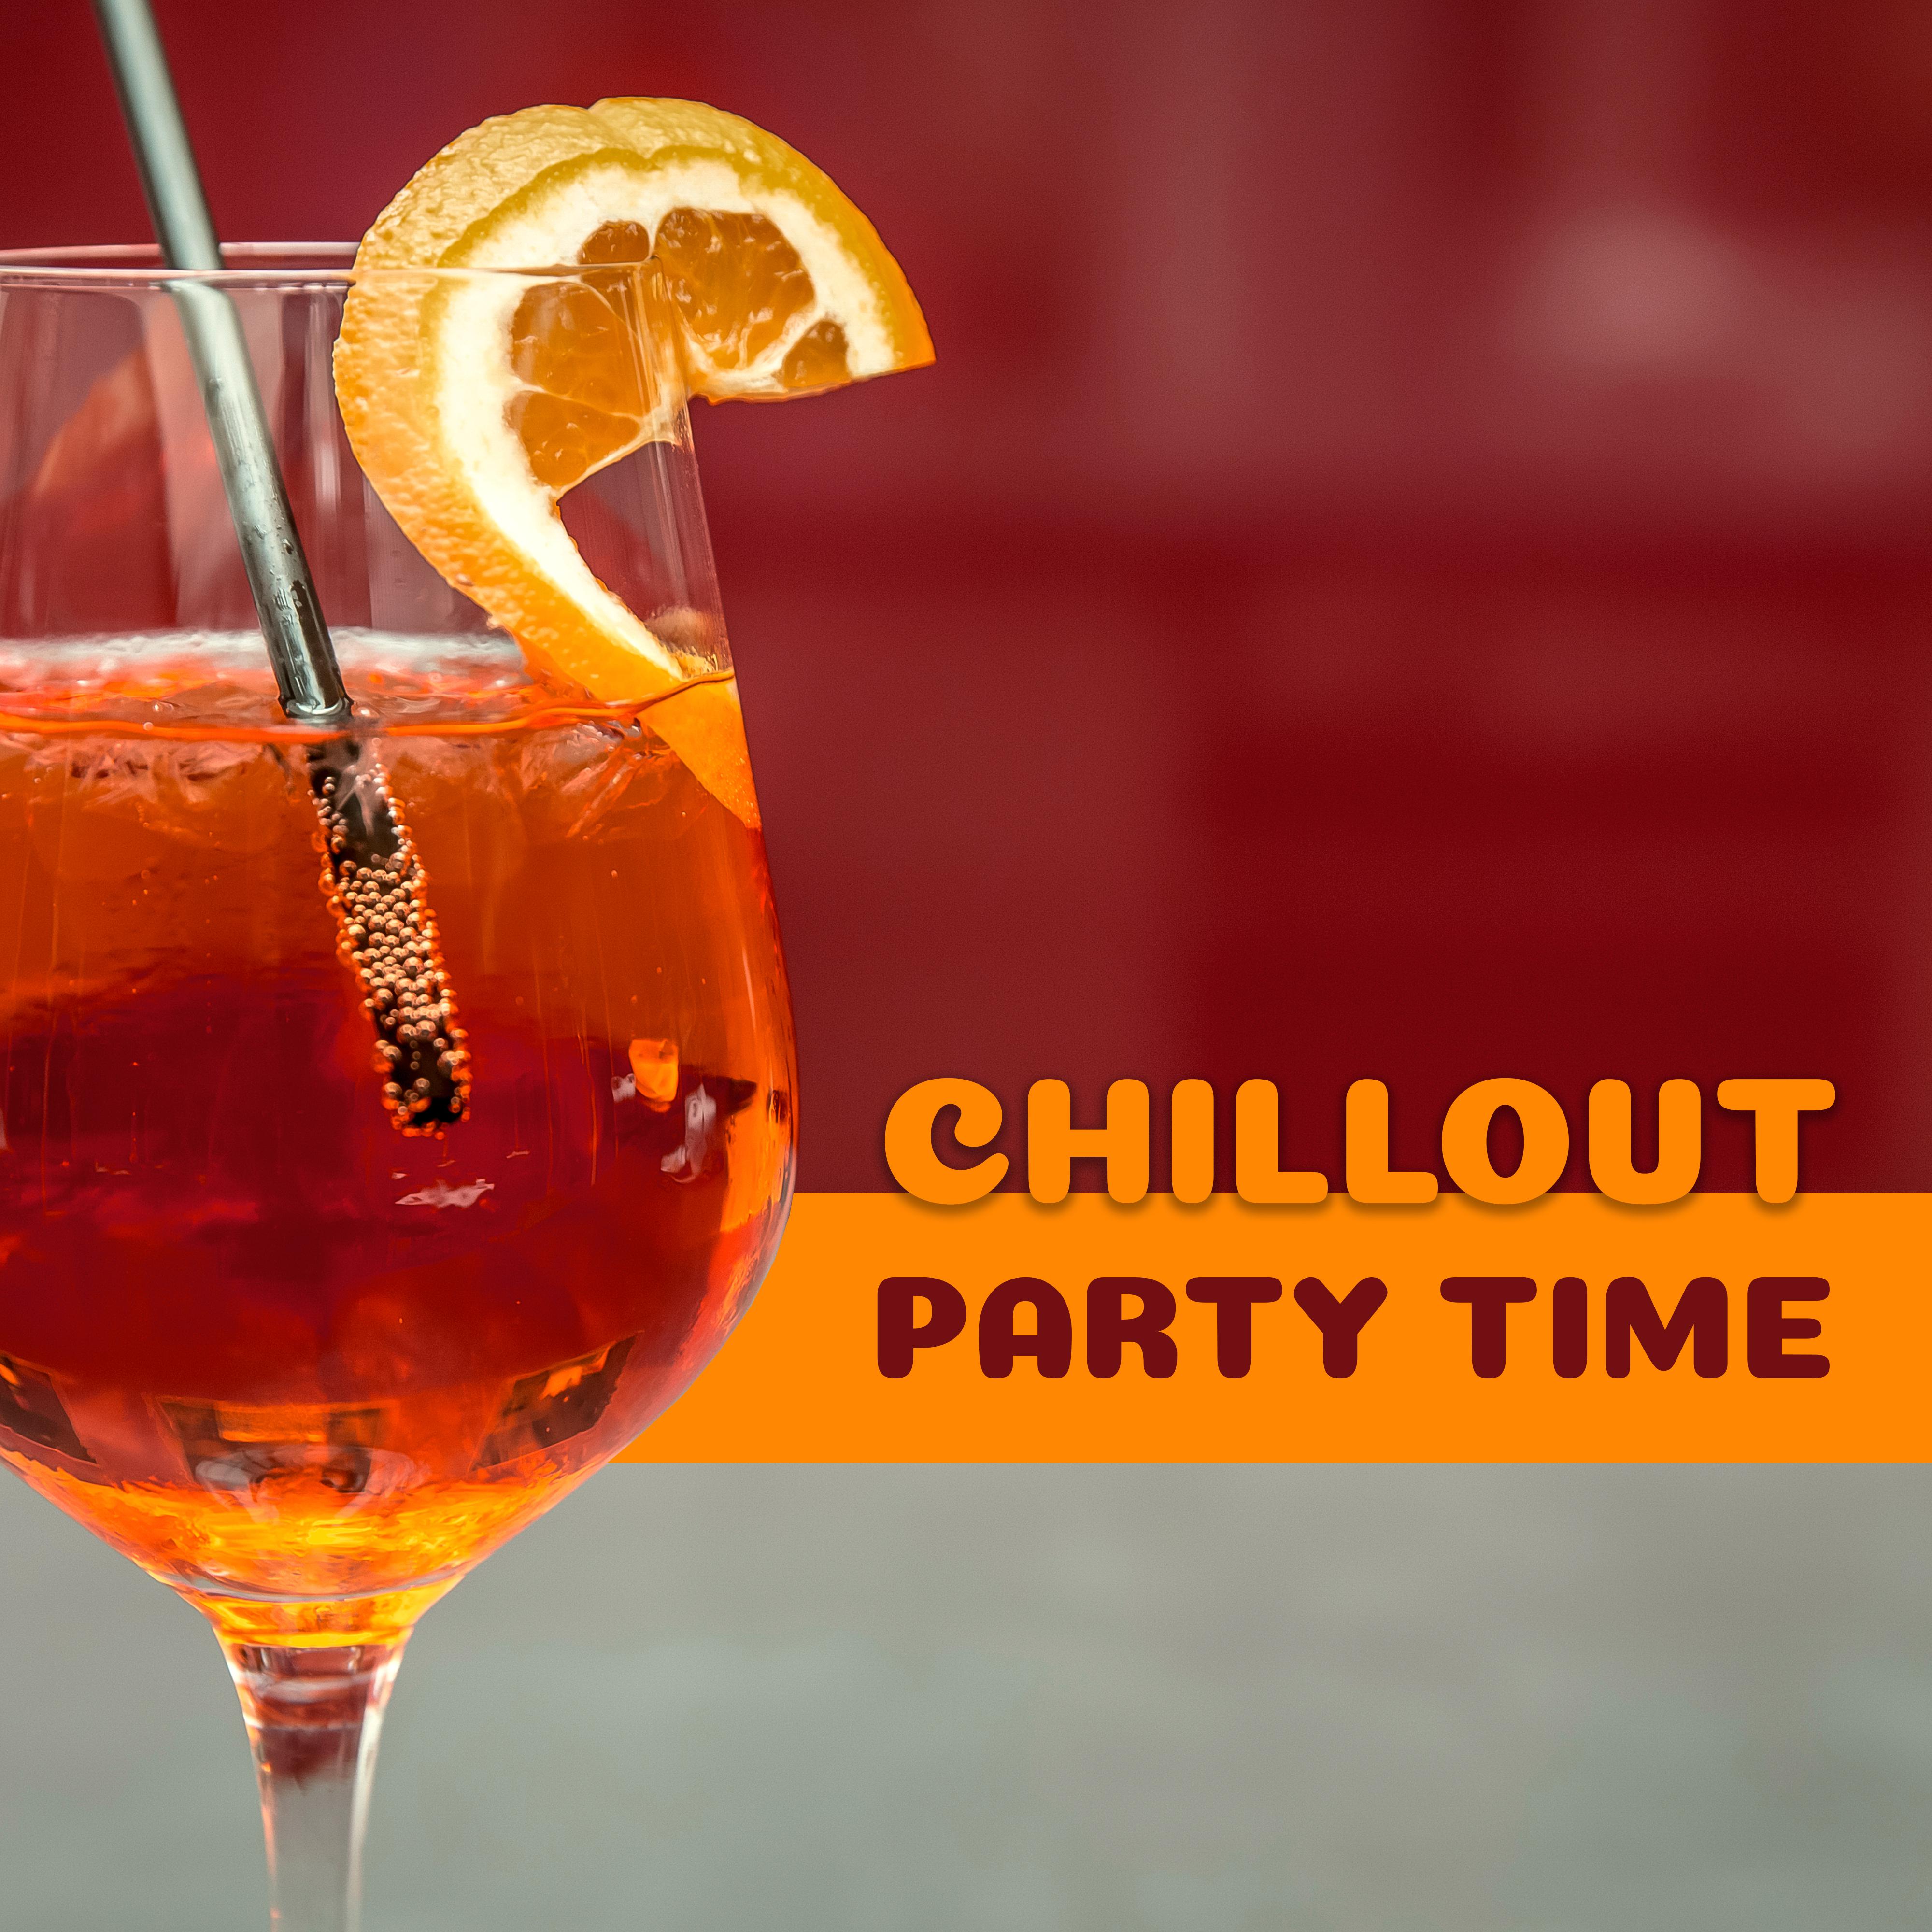 Chillout Party Time  Ibiza Party, Best Holiday Music, Beach Drinks, Dance Floor